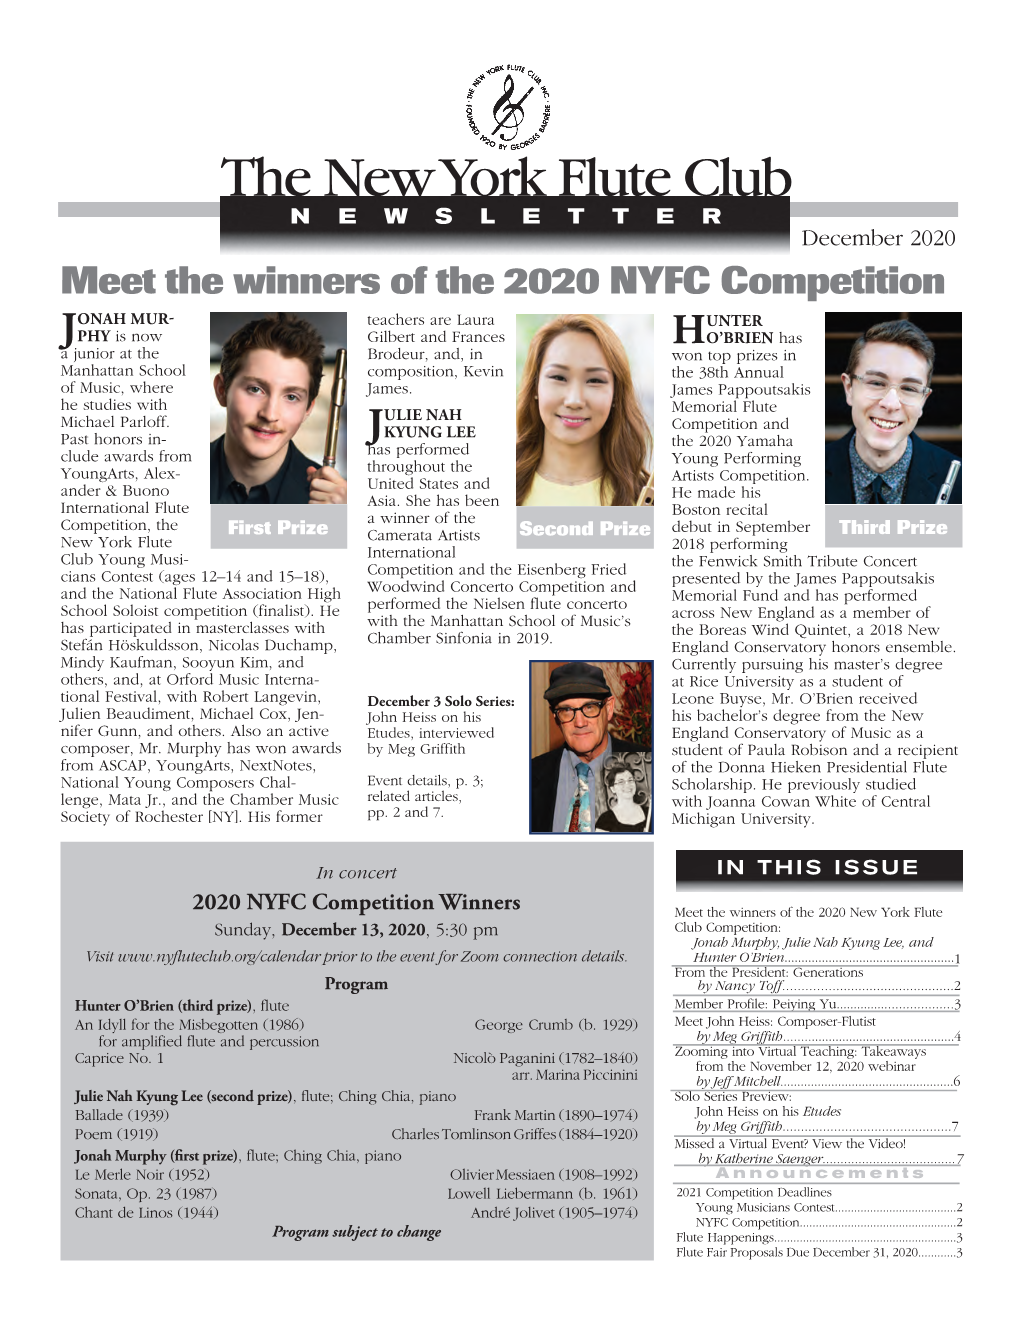 Meet the Winners of the 2020 NYFC Competition